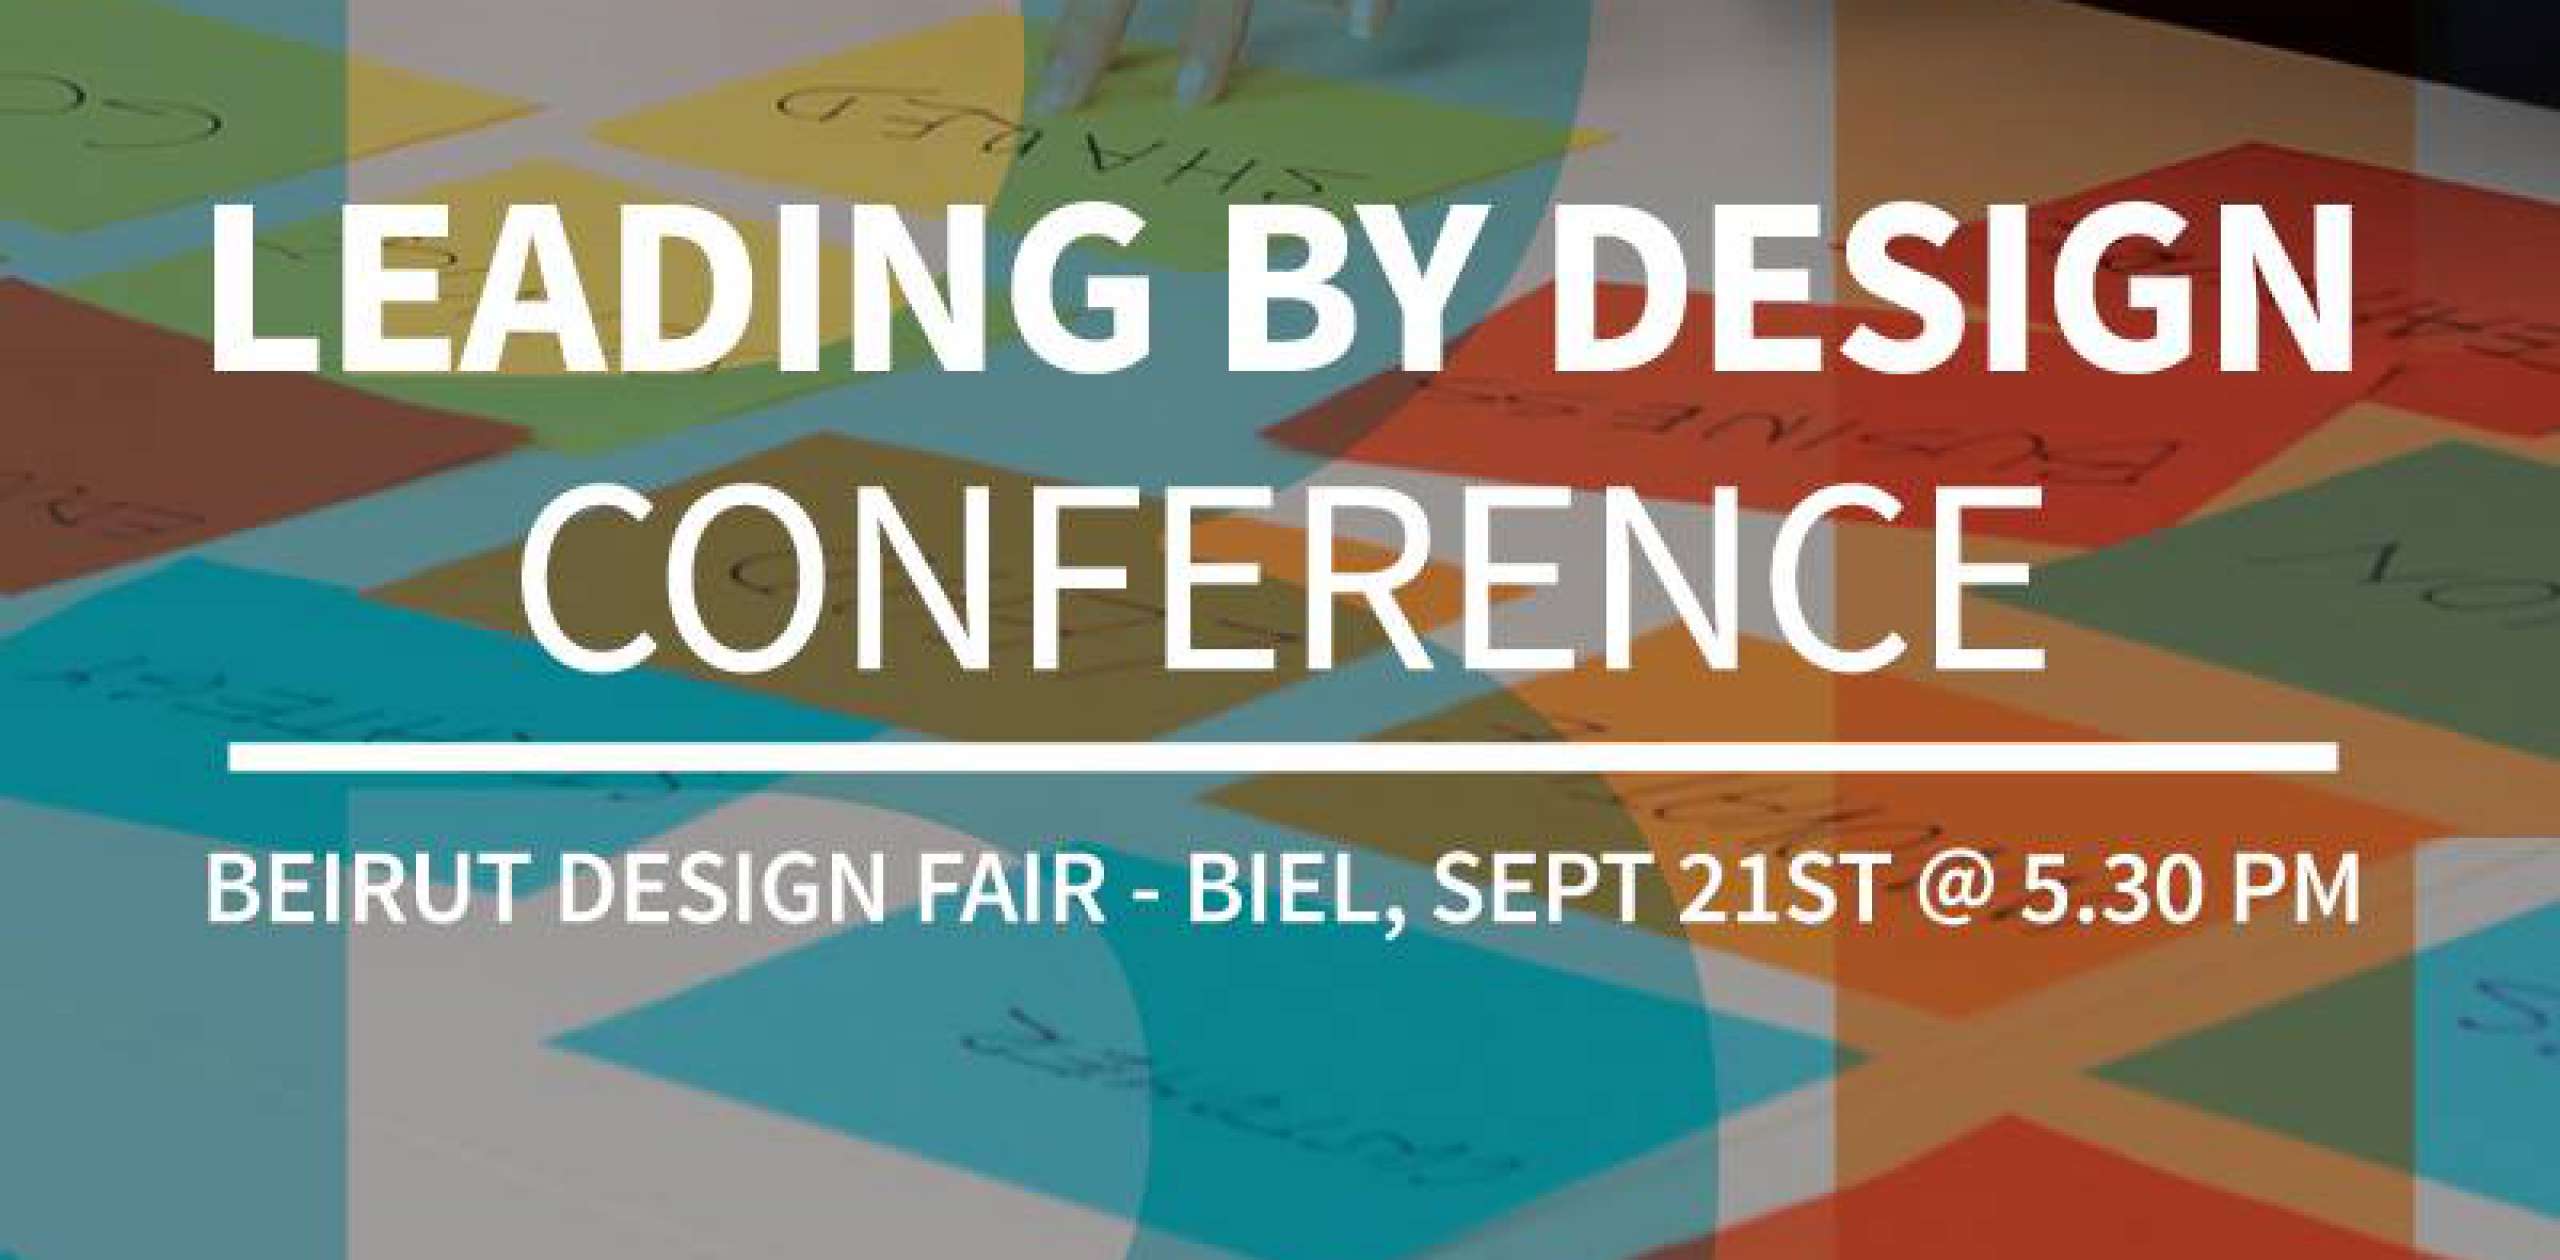 Leading by Design Conference 2017